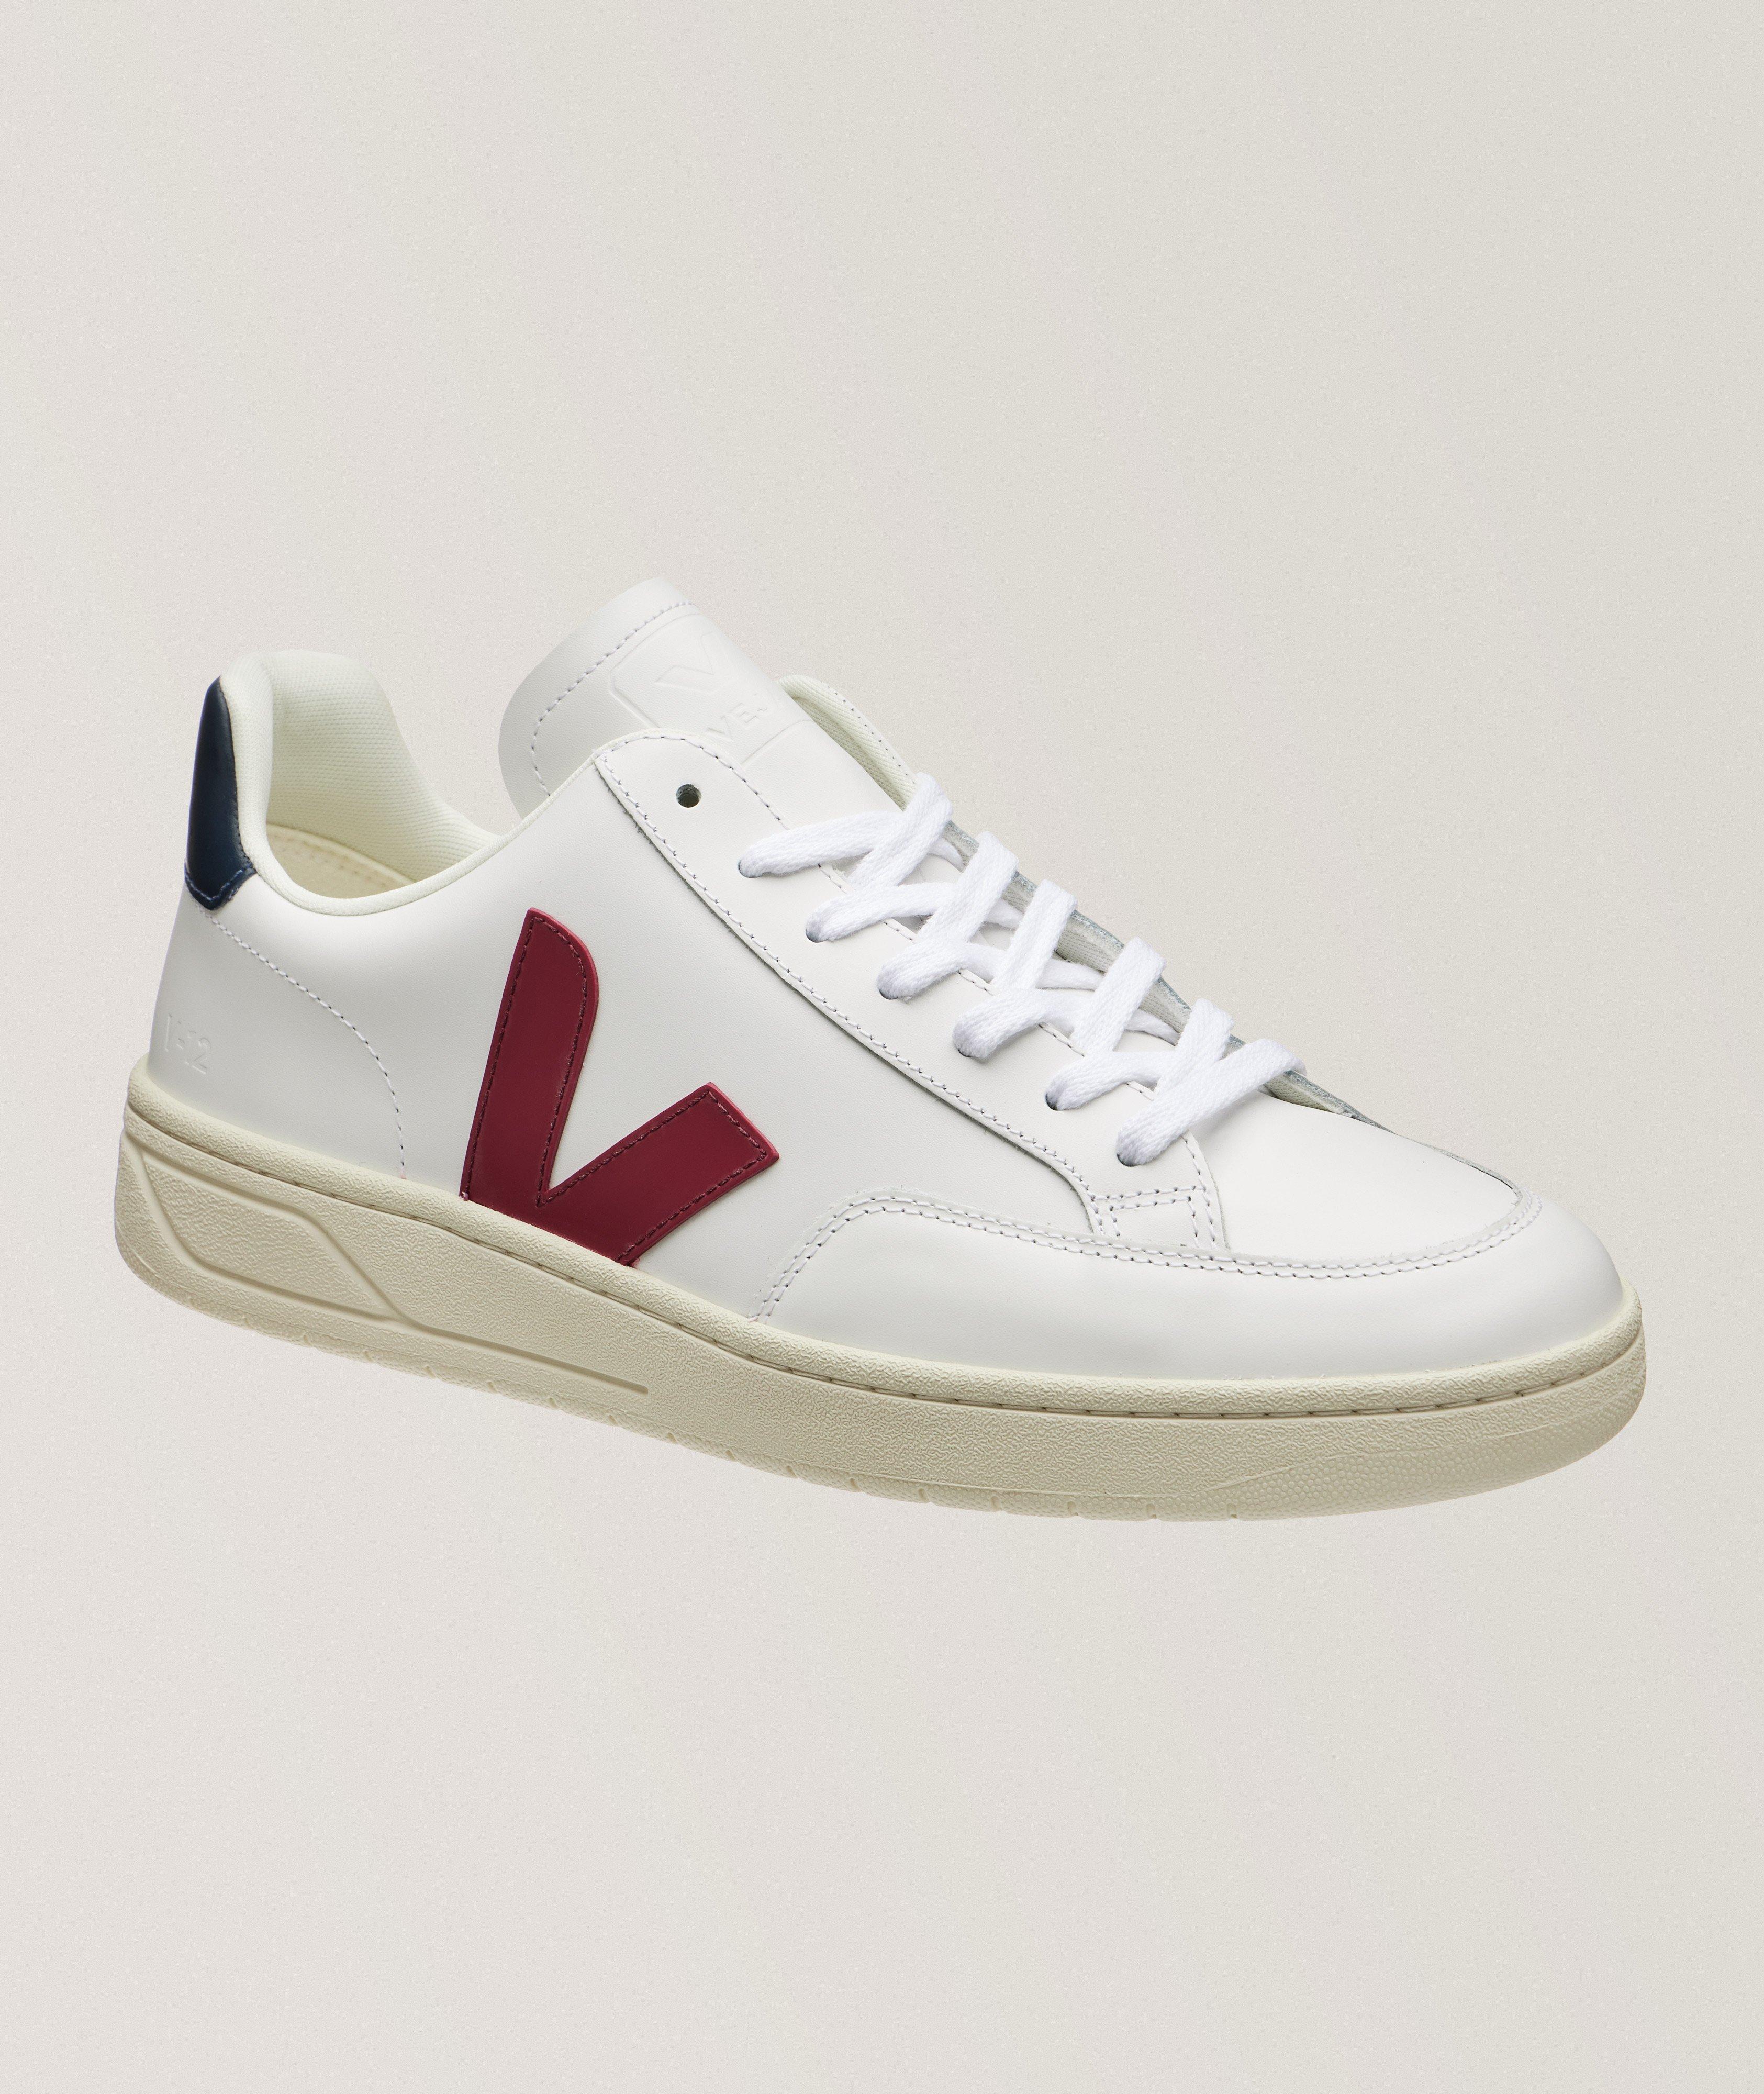 V-12 Leather Sneakers image 0